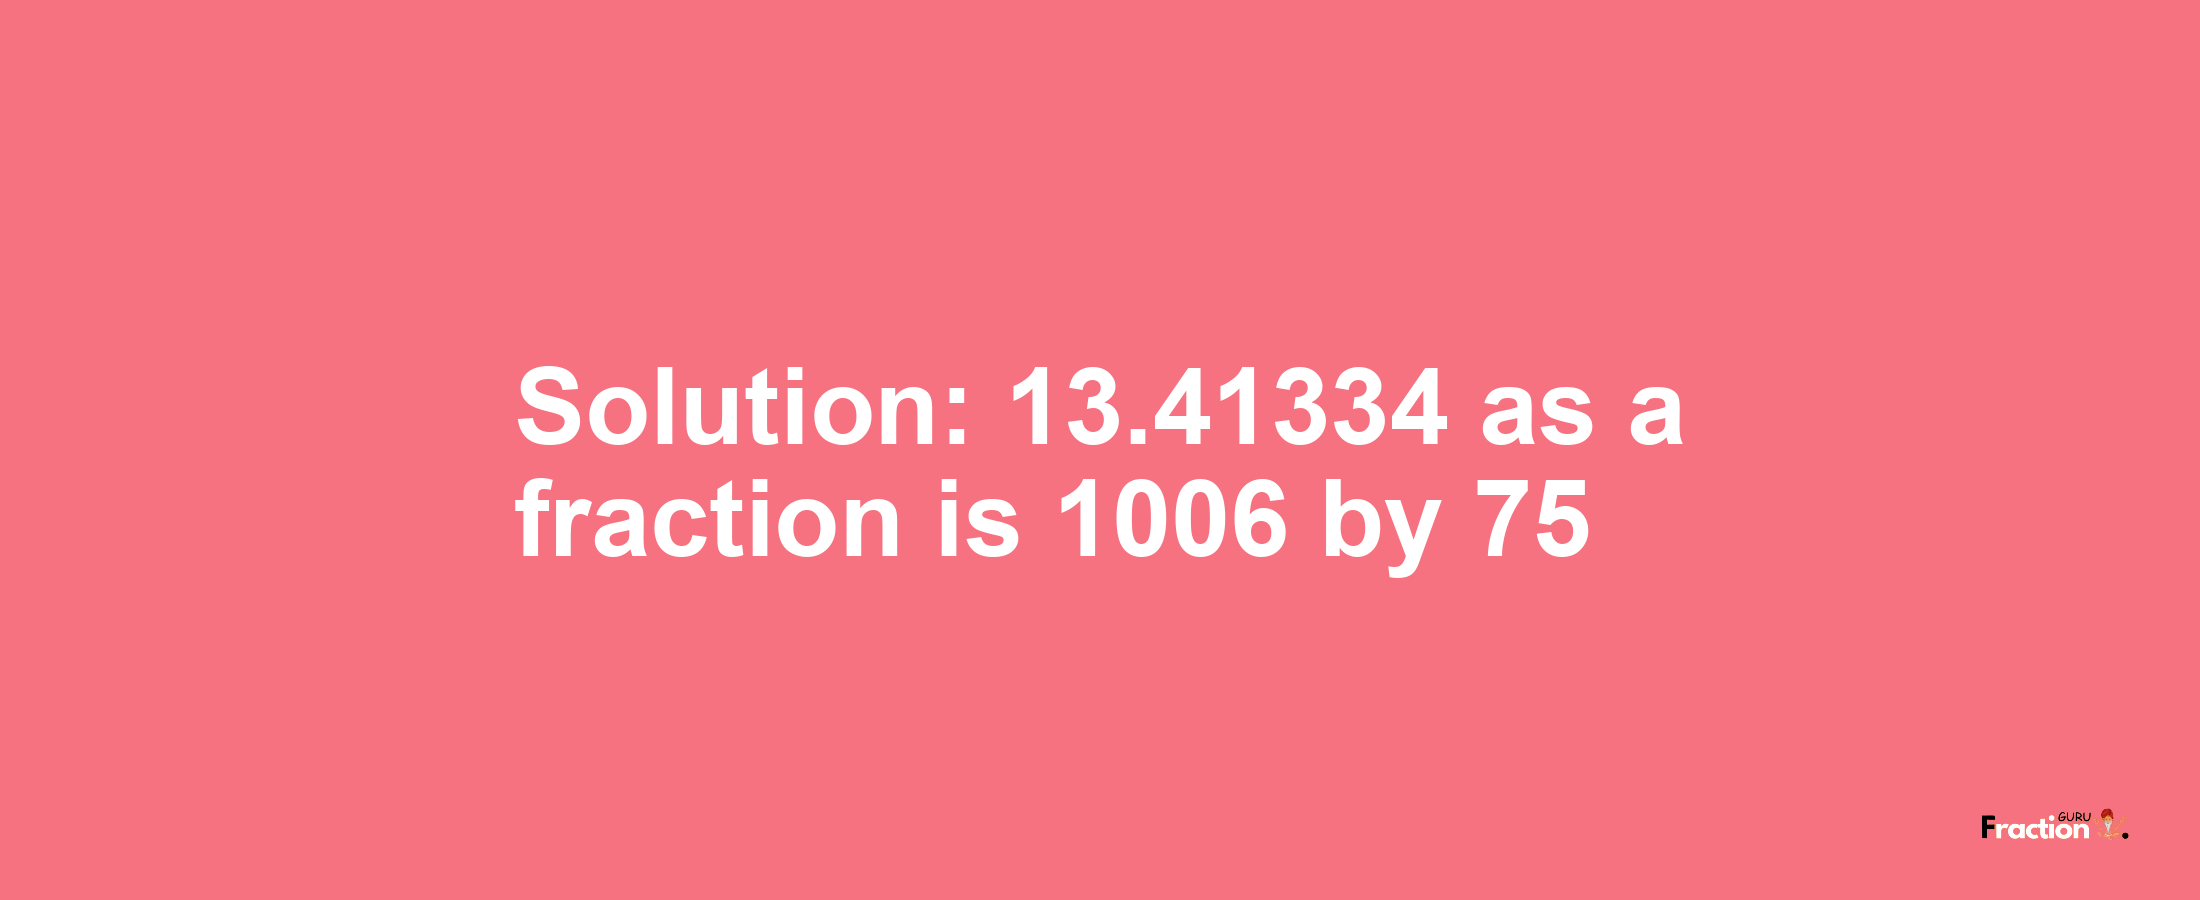 Solution:13.41334 as a fraction is 1006/75